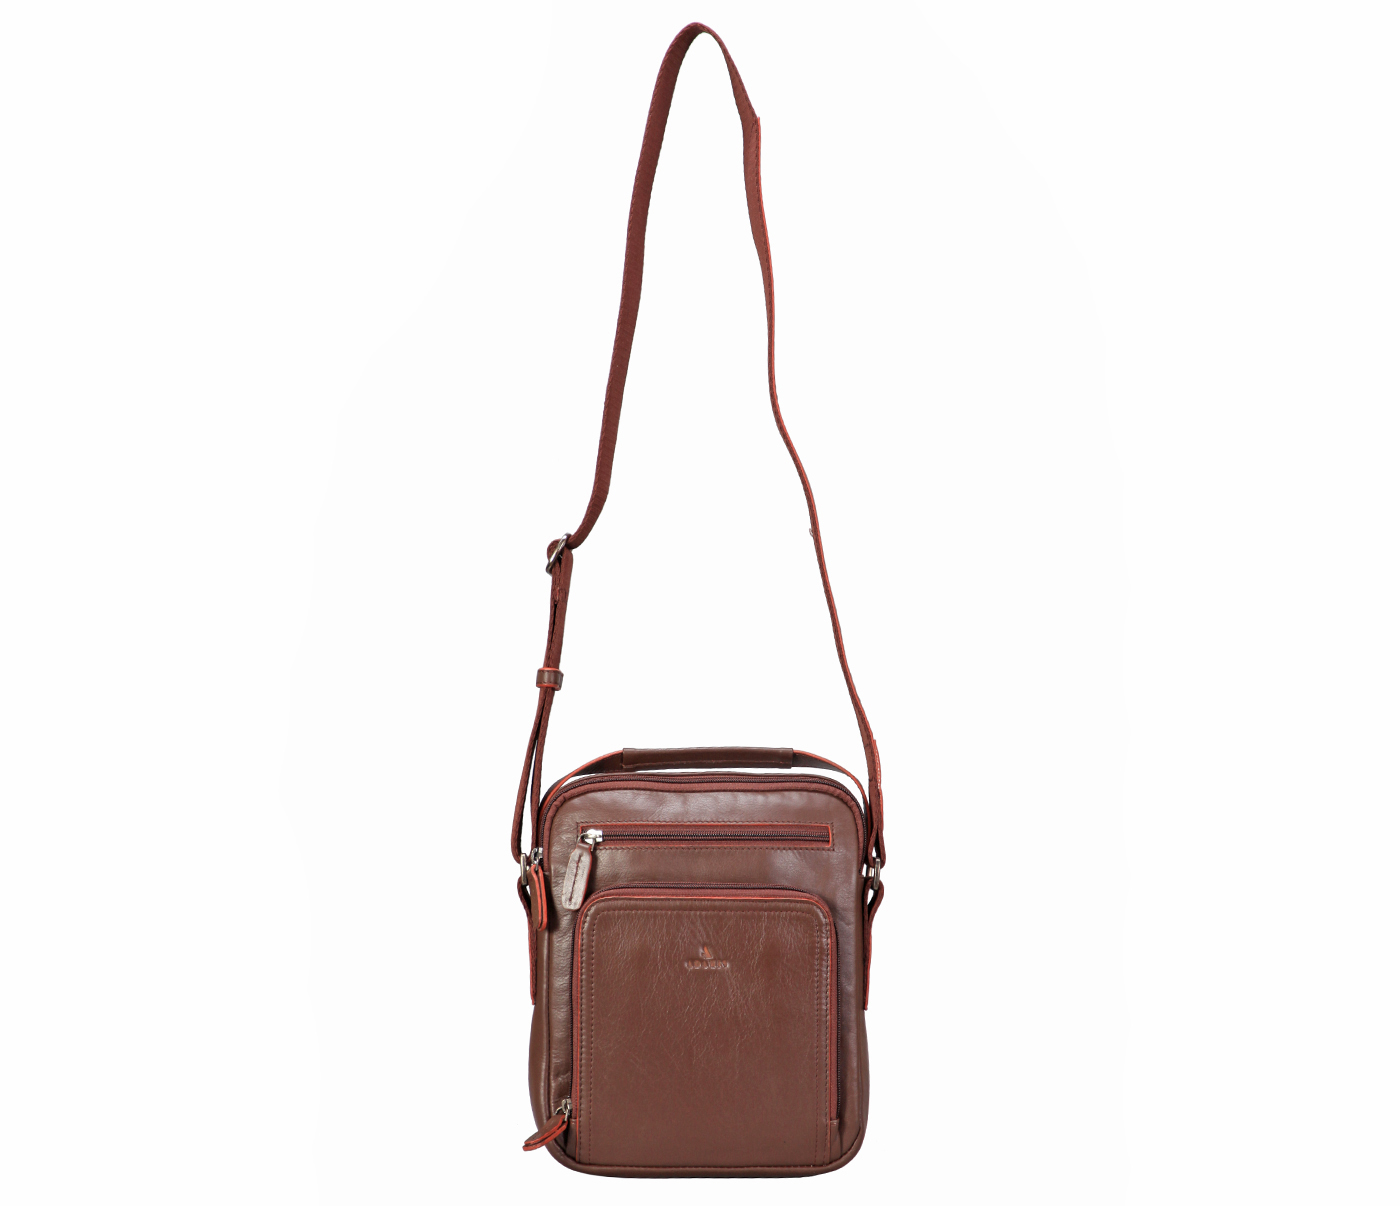 P38-Rafael-Men's Travel Pouch in Genuine Leather - Brown